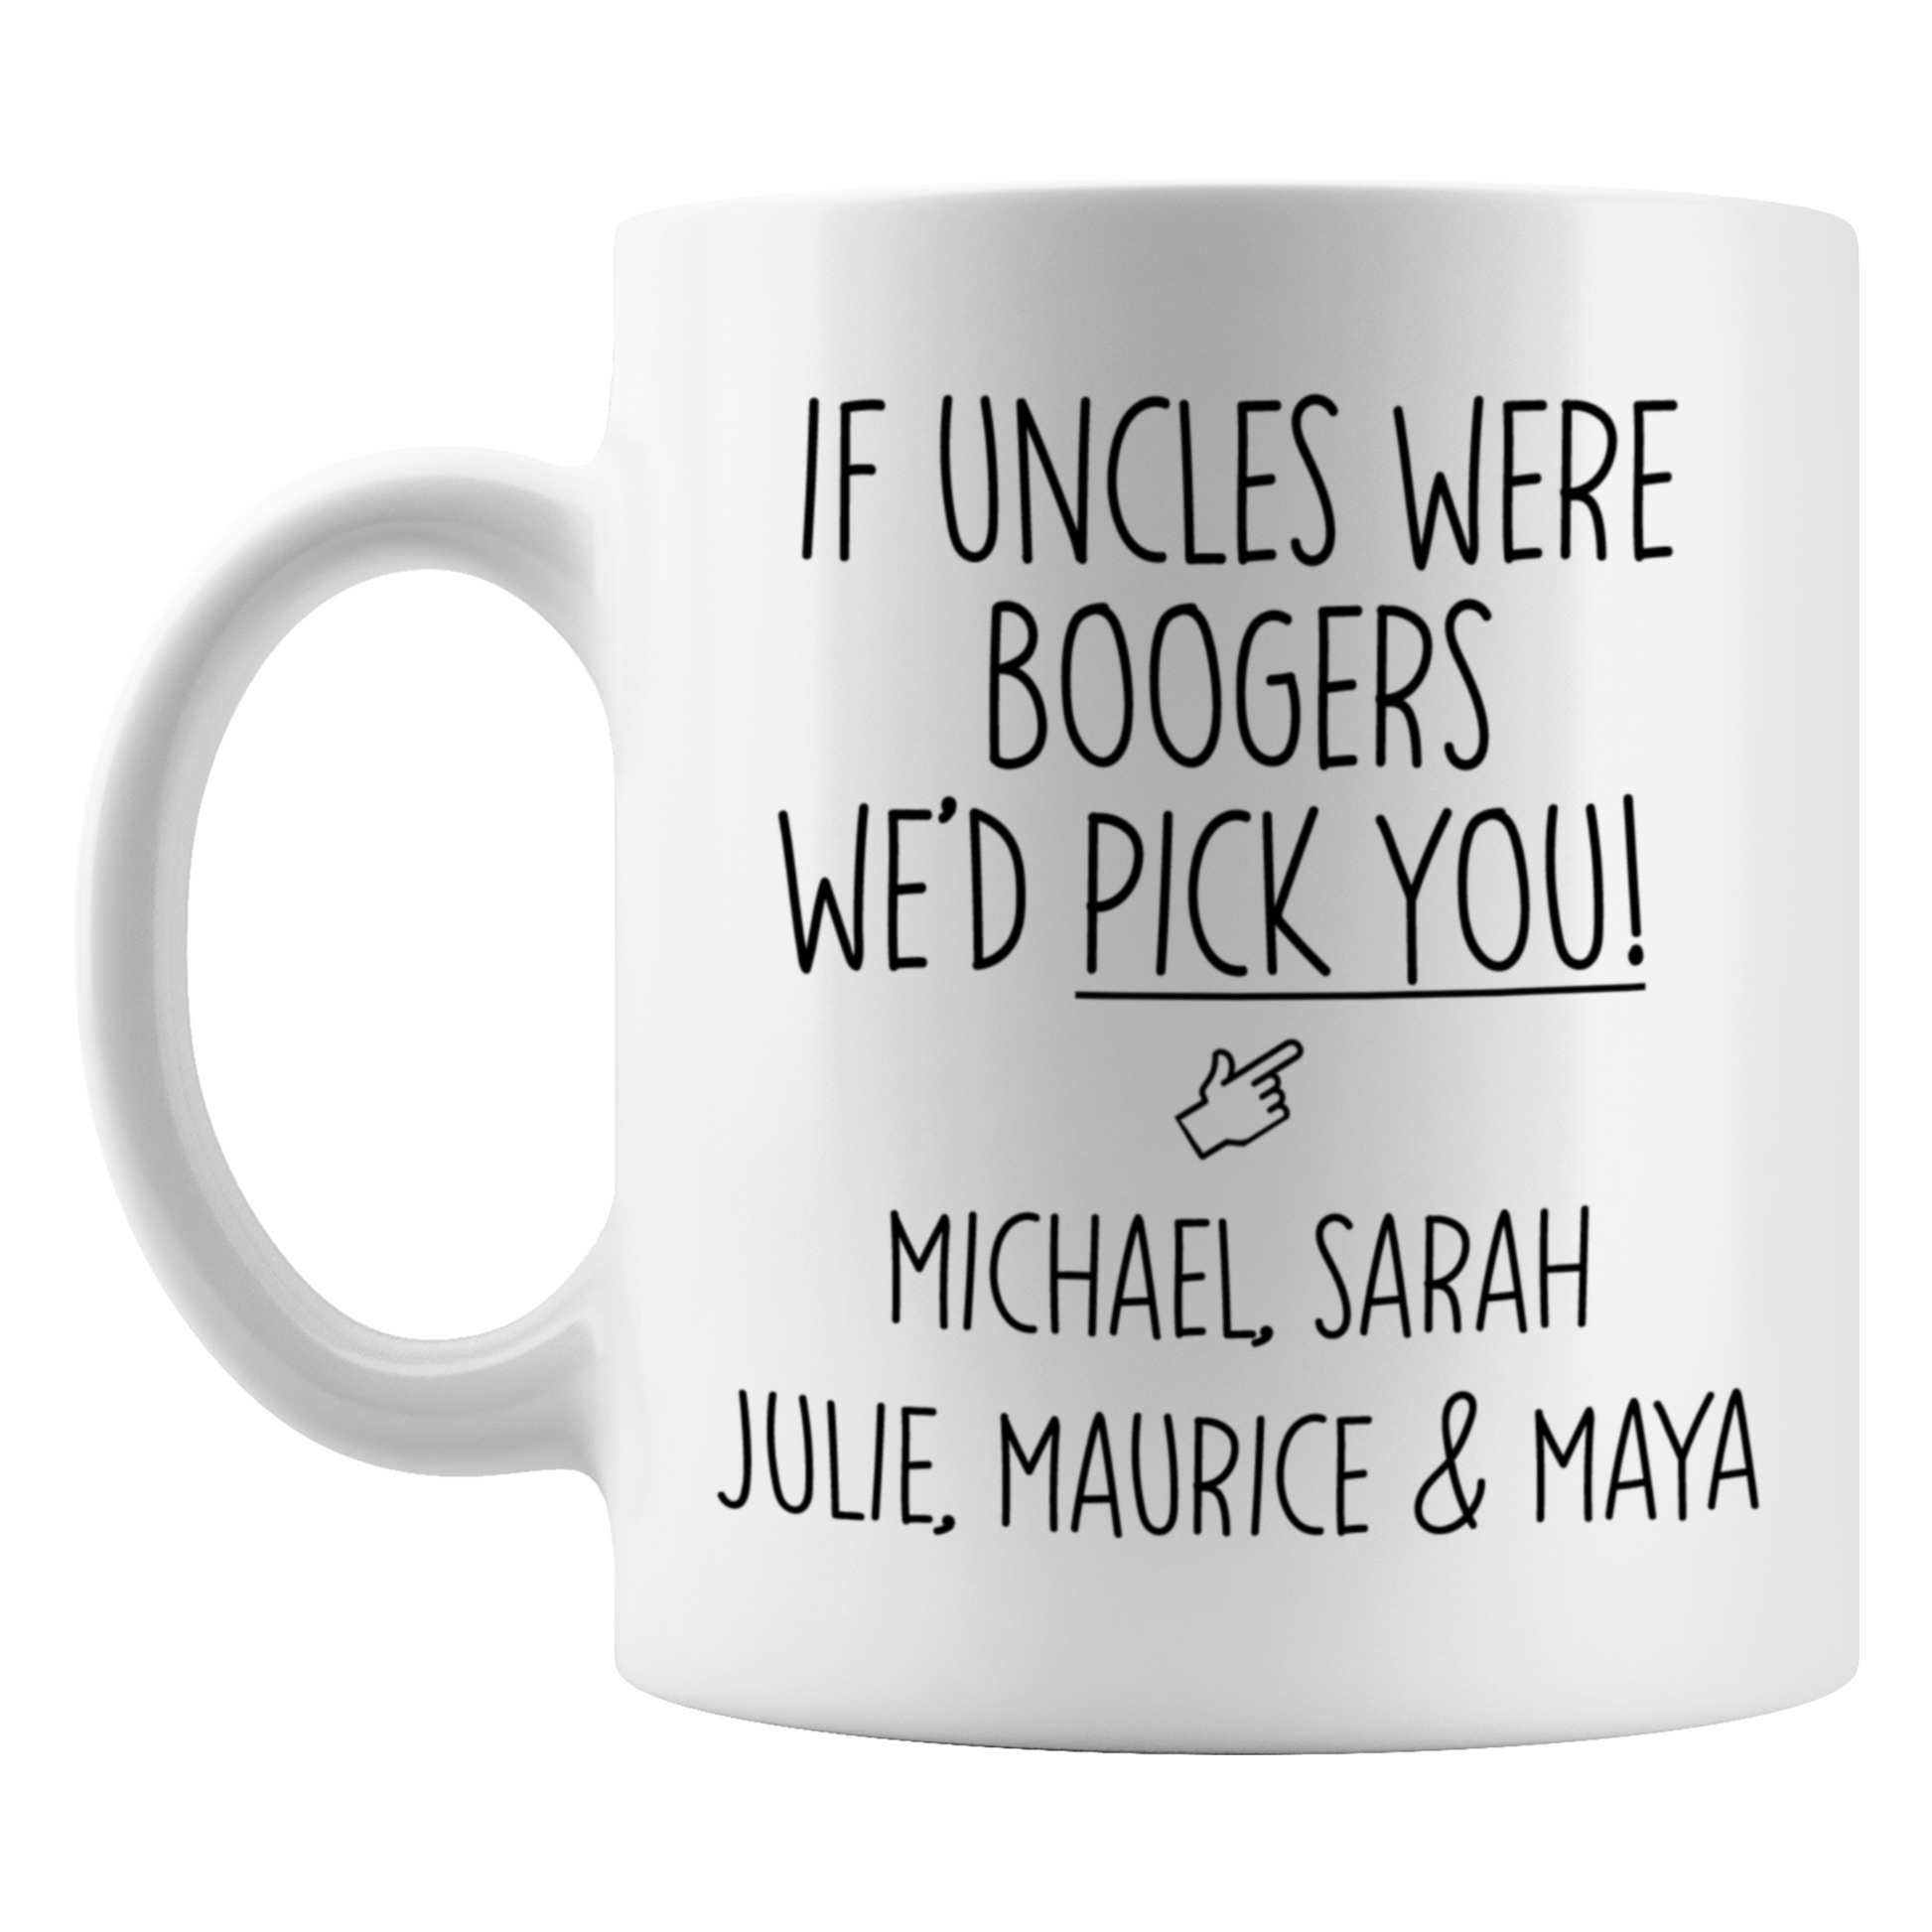 If Uncles were Boogers We'd Pick You Mug